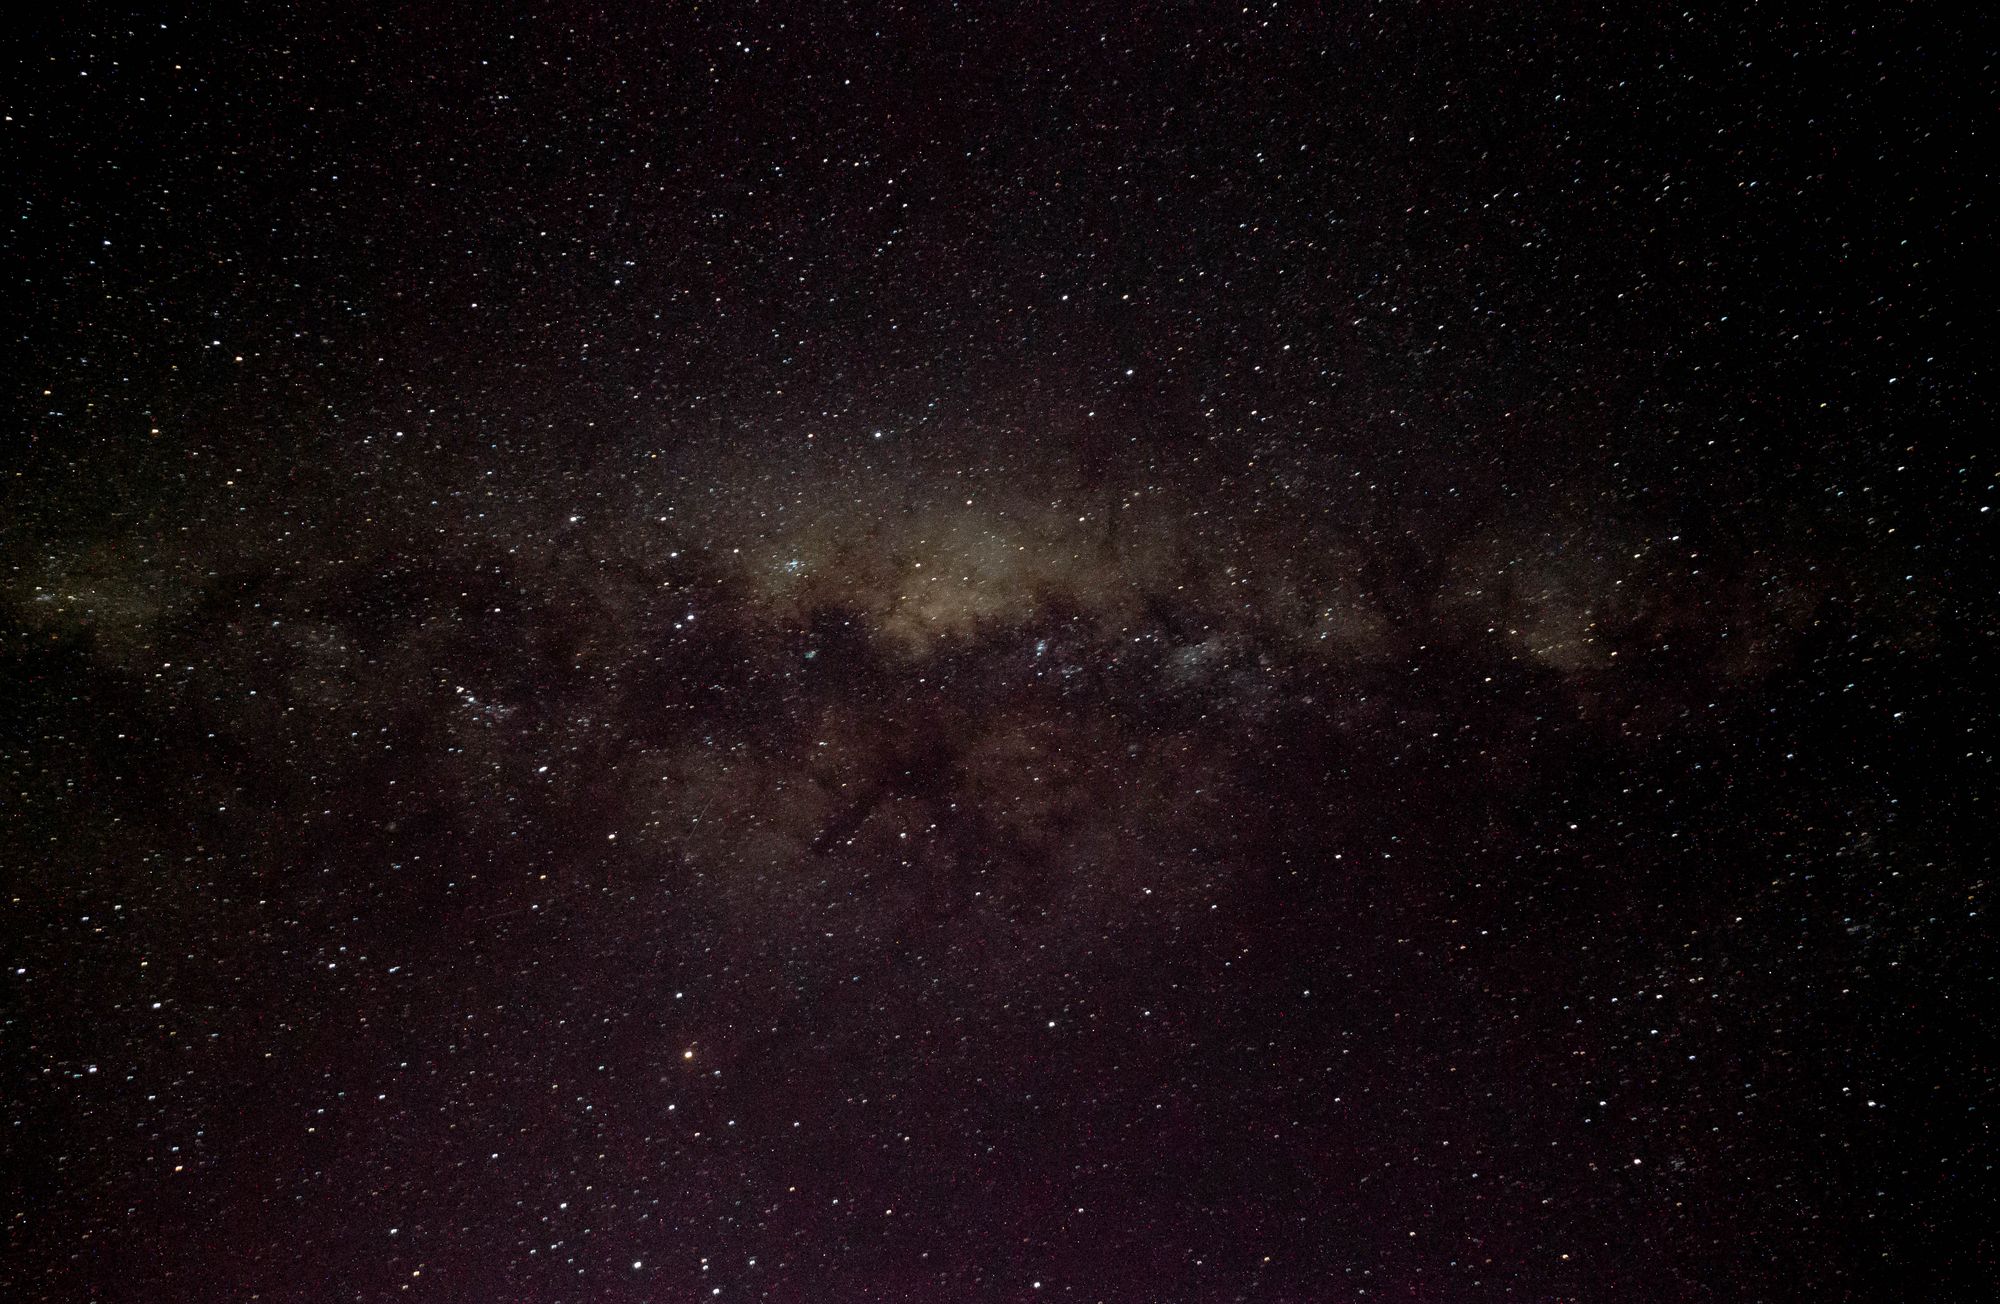 Image of the Milky Way in the night sky.